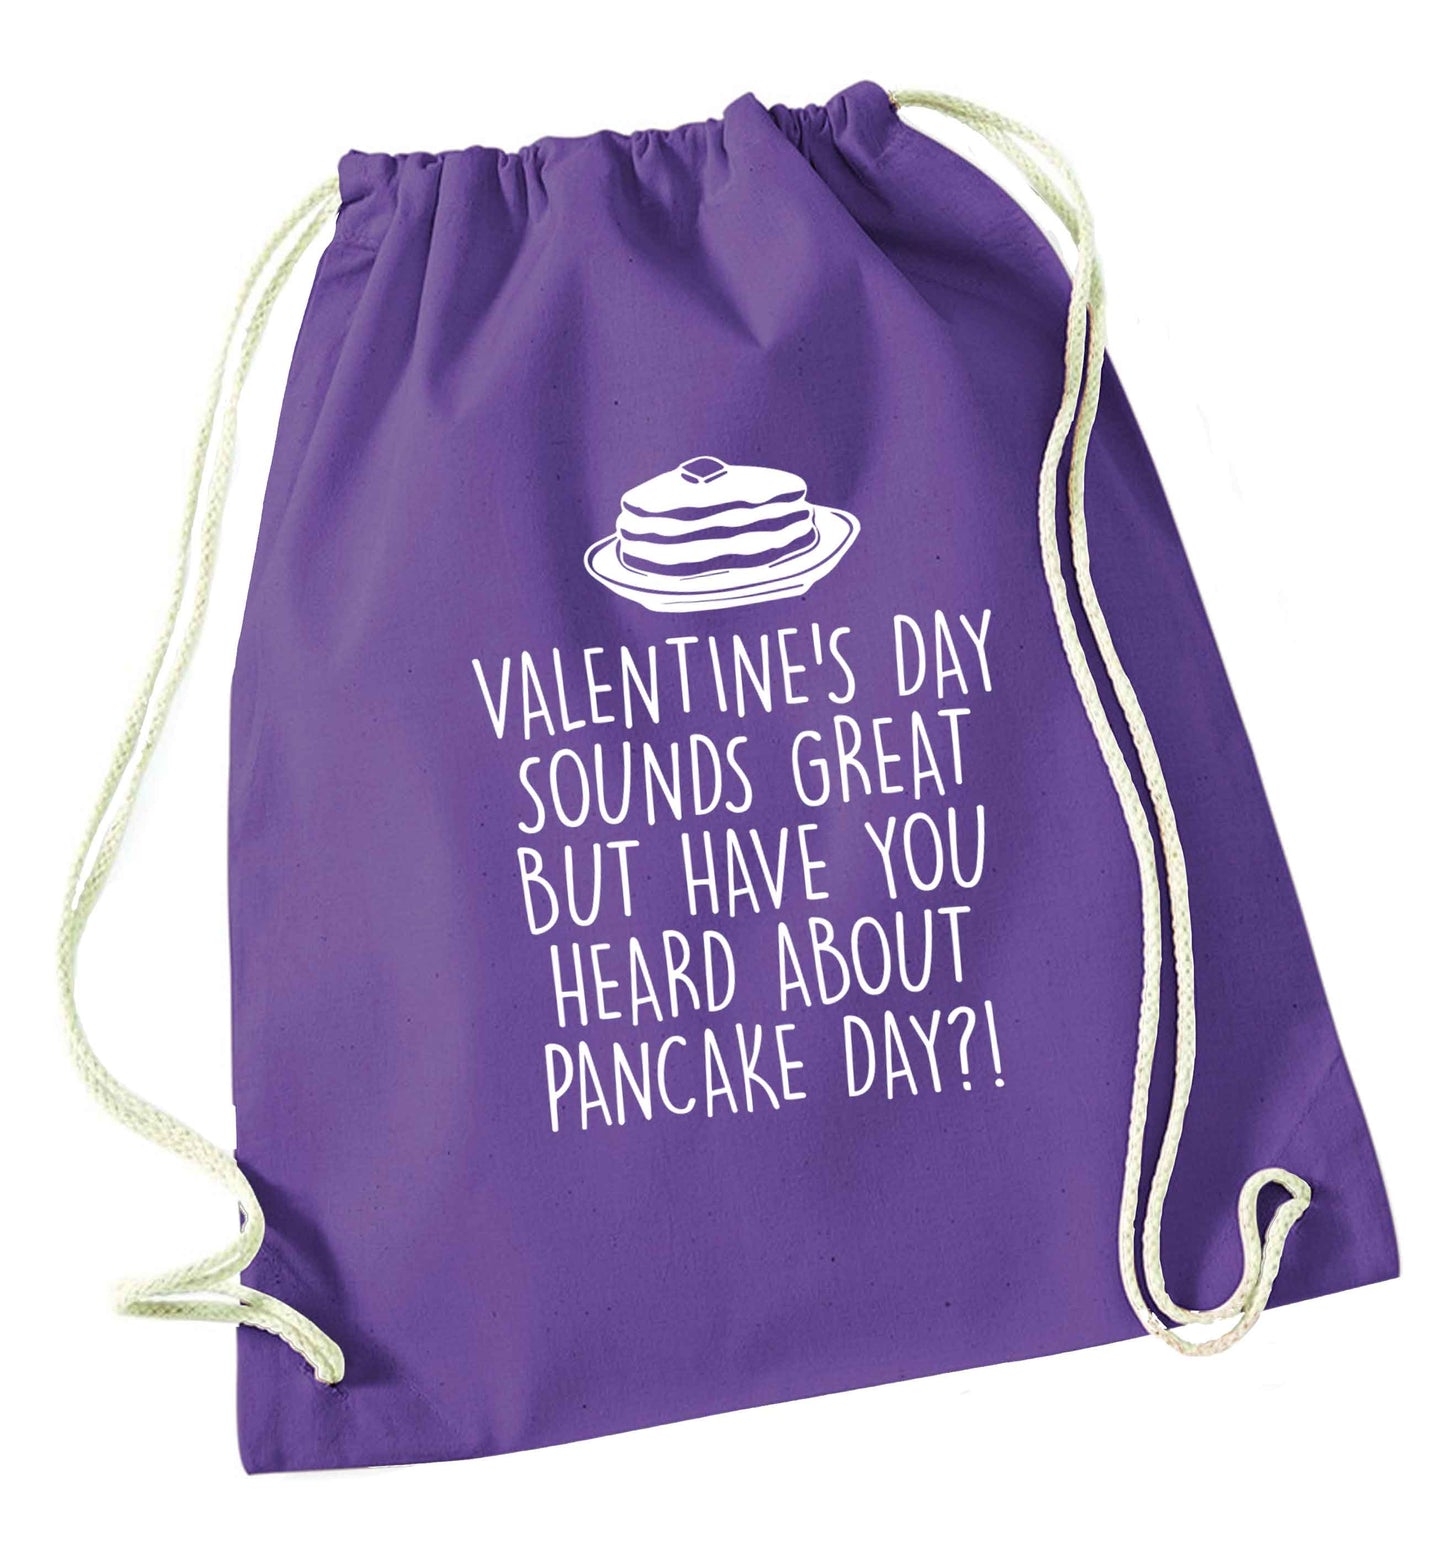 Valentine's day sounds great but have you heard about pancake day?! purple drawstring bag